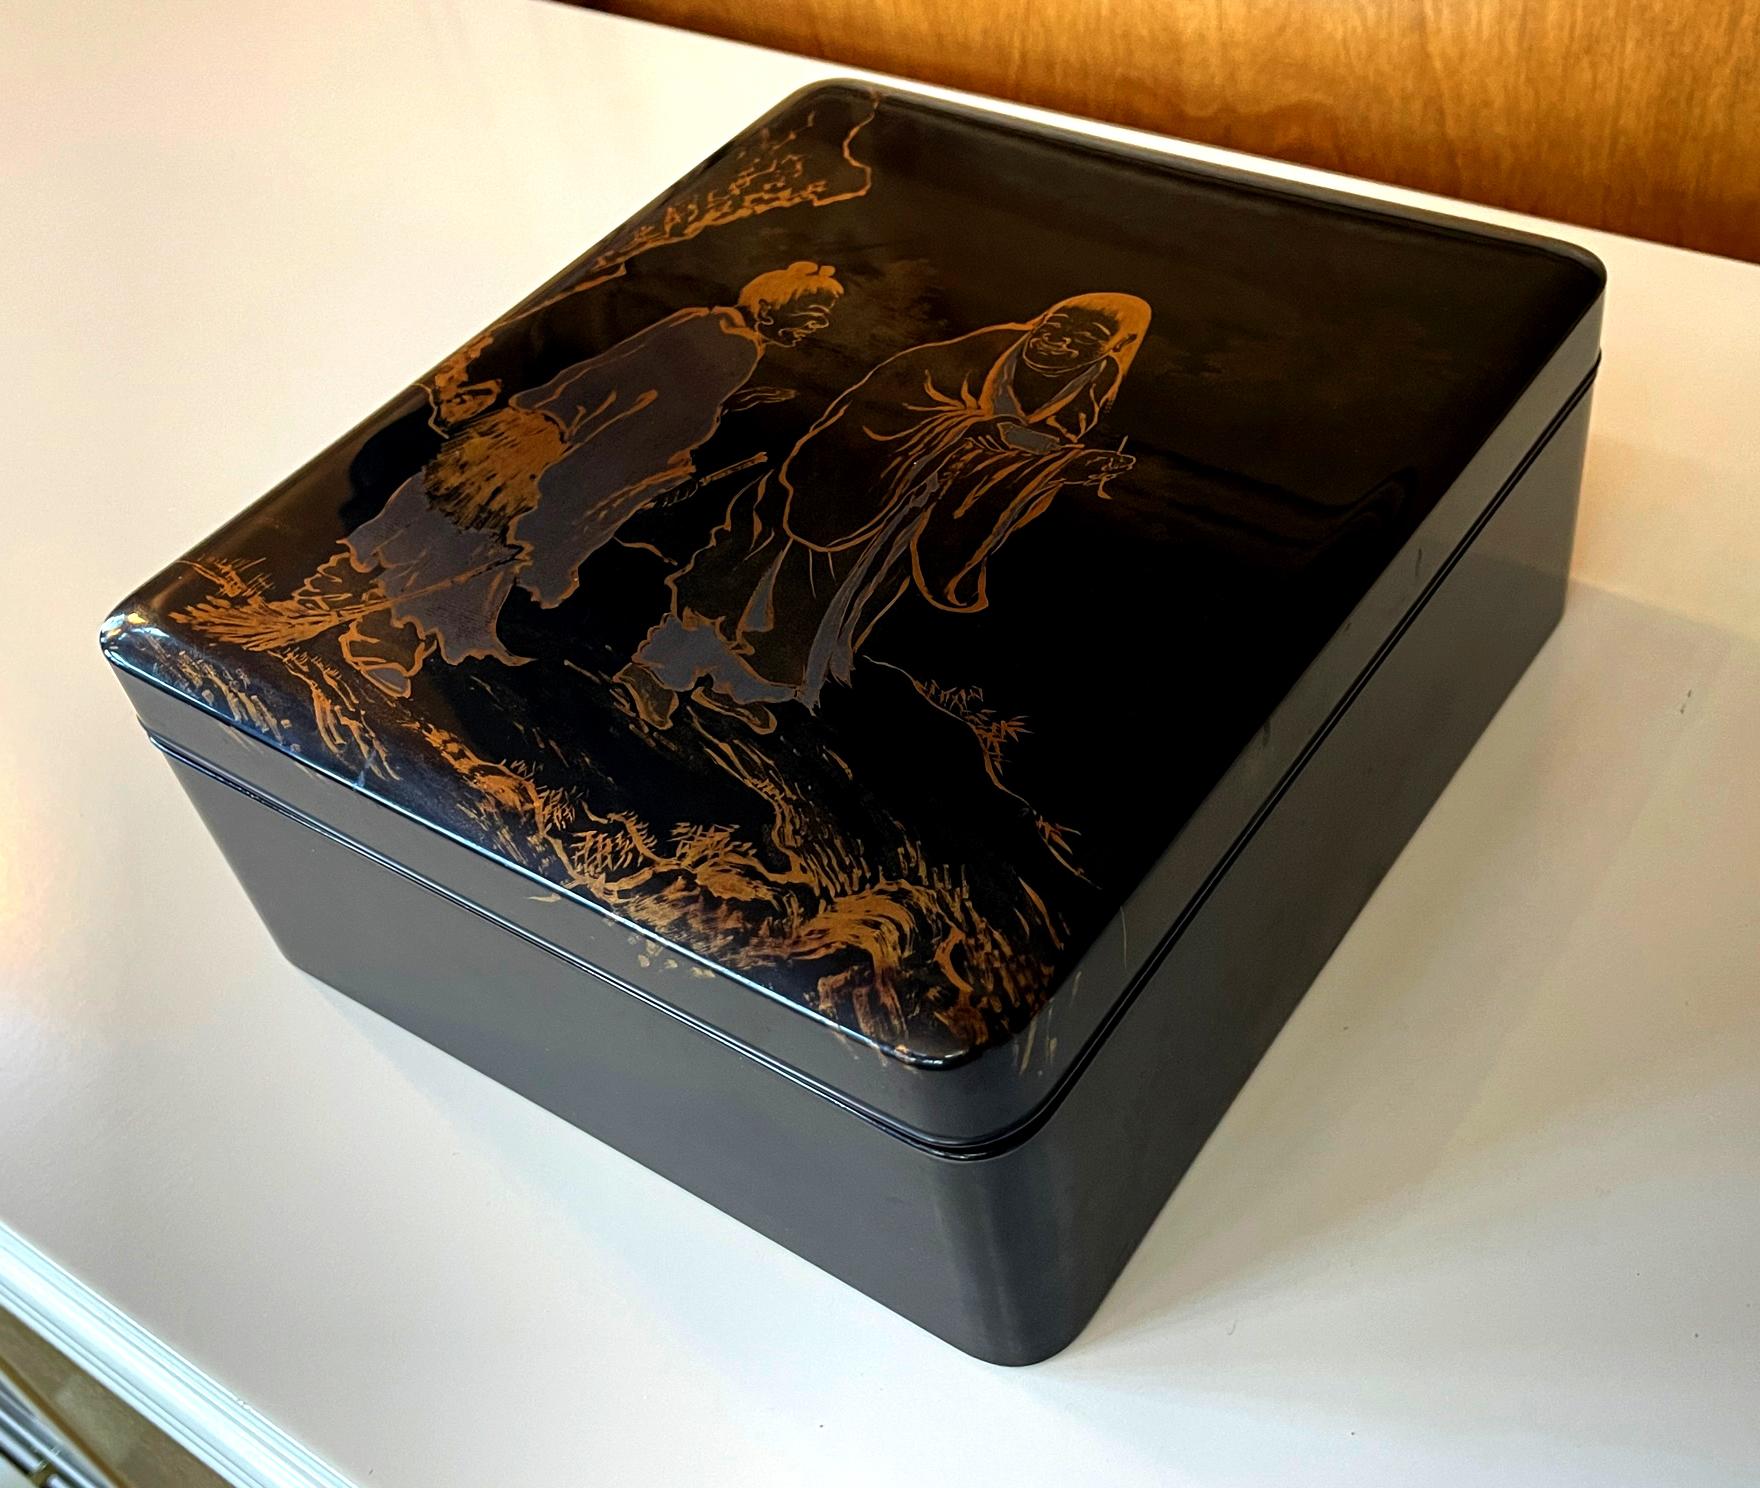 A Japanese roiro lacquer scholar combo box with an upper tier of inkstone box (Suzuribako) and a lower document box (Ryoshibako) circa 1910-30s (end of Meiji to Showa period). The high glossy box was beautifully decorated with an image of the